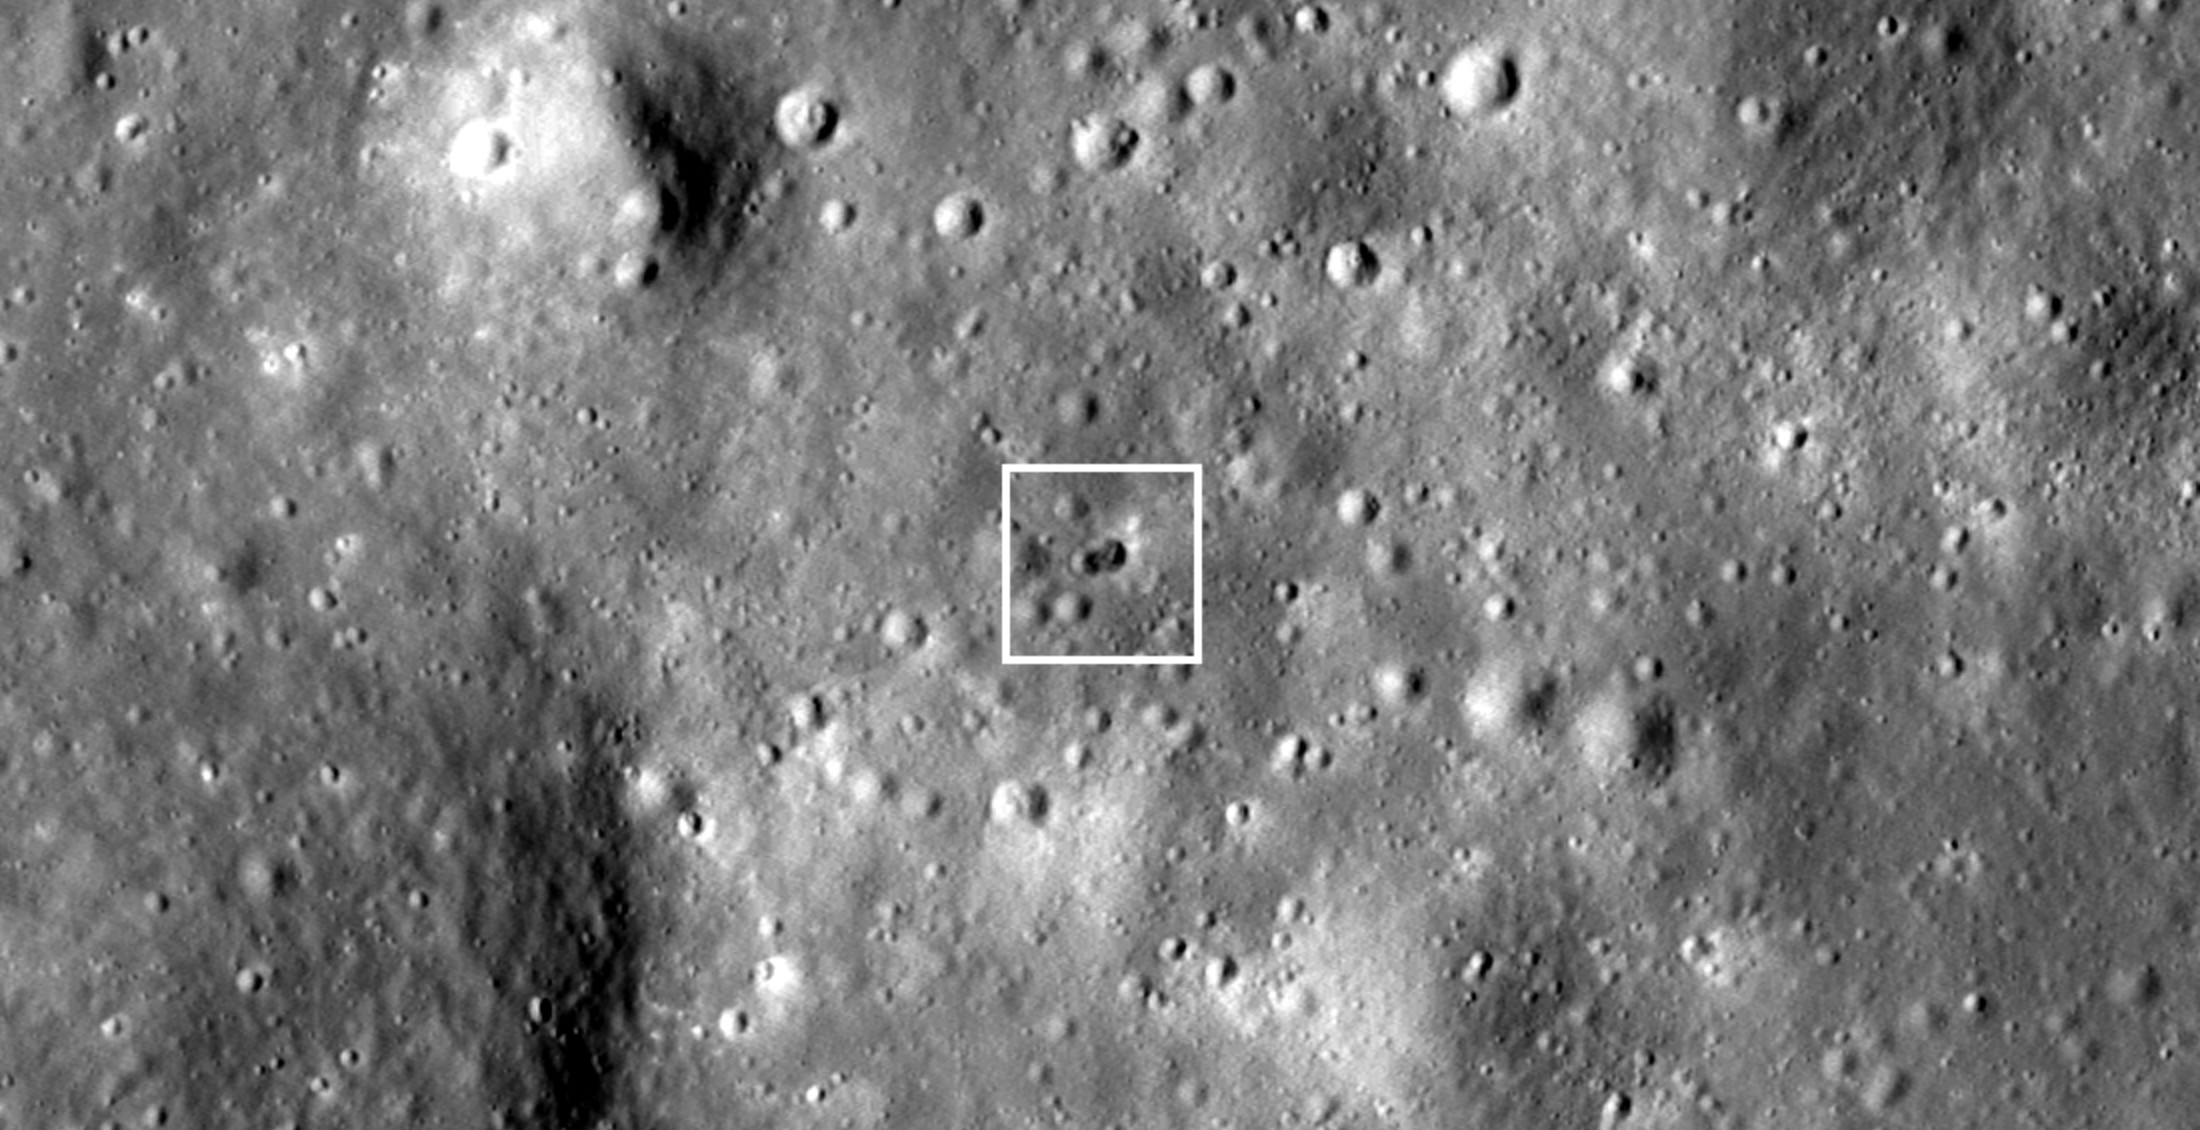 A photograph showing the odd double crater on the surface of the Moon. Image Credit: NASA/GSFC/Arizona State University.